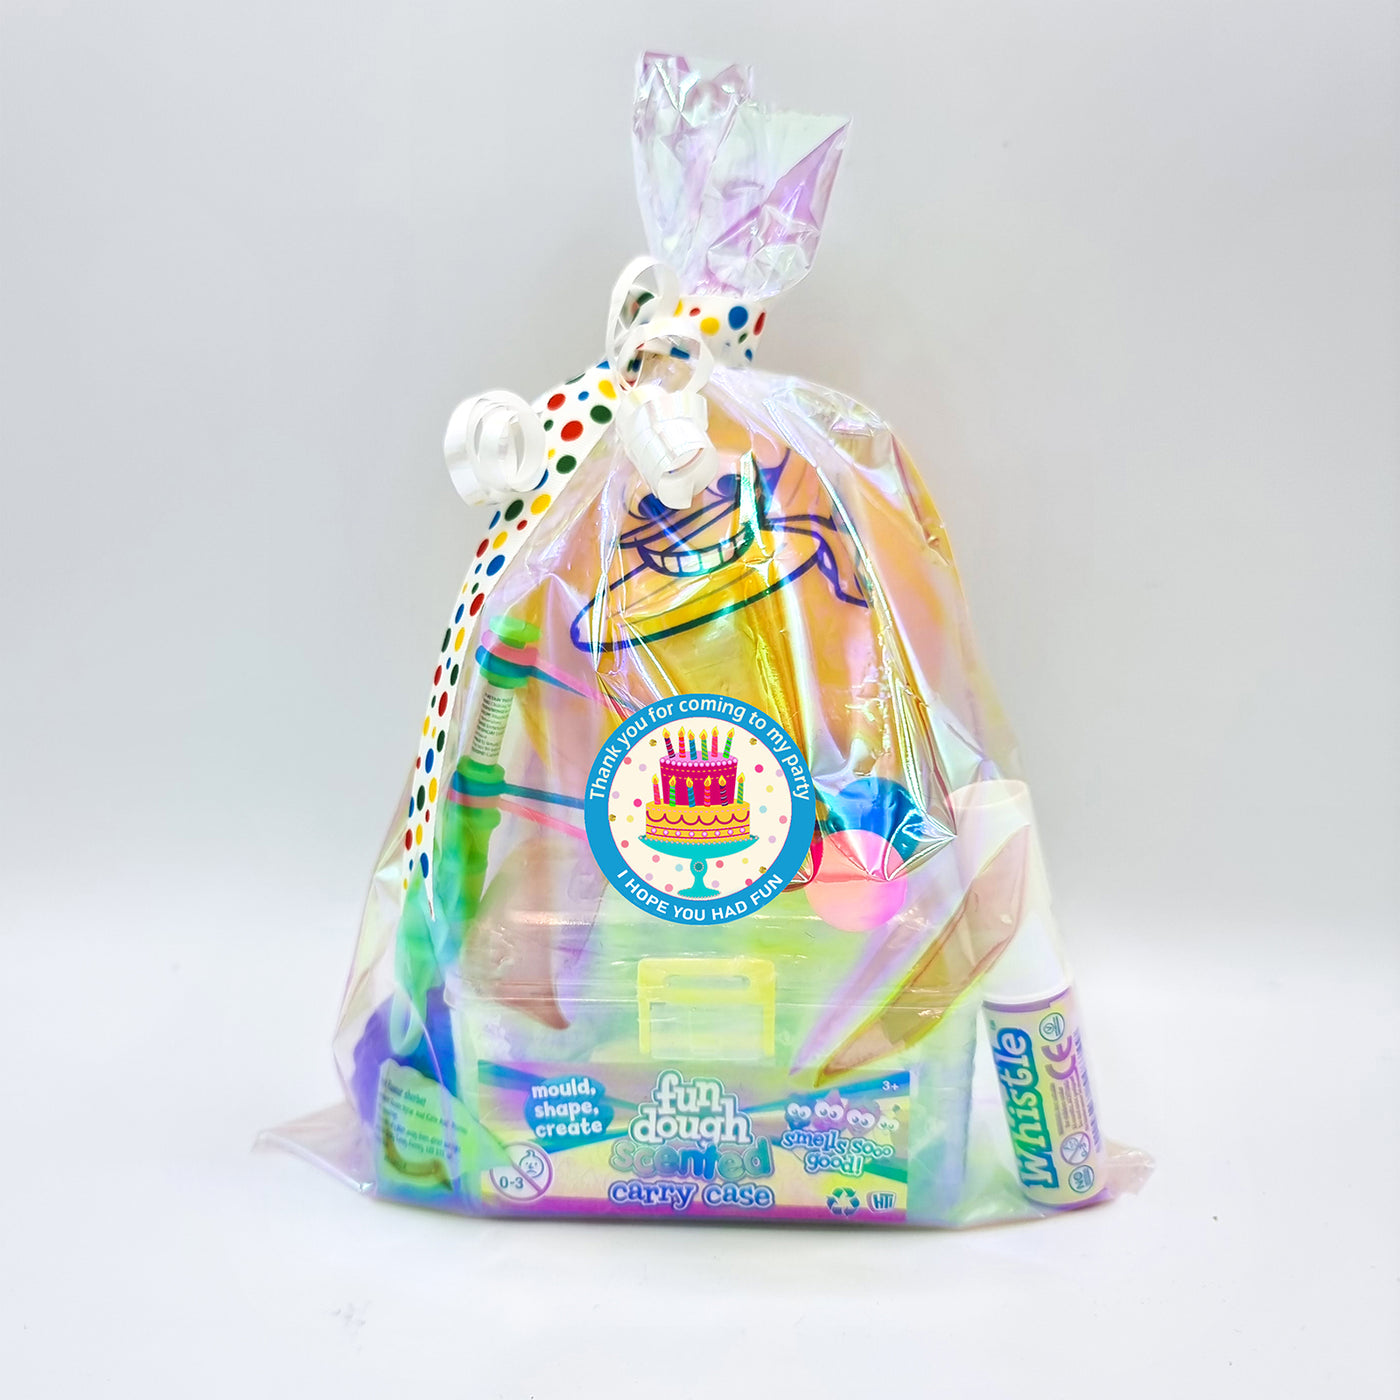 Pre Filled Scented Tutti Fruity Cake Birthday Party Favours Goody Bags With Toys And Sweets And Polka Dot Ribbon